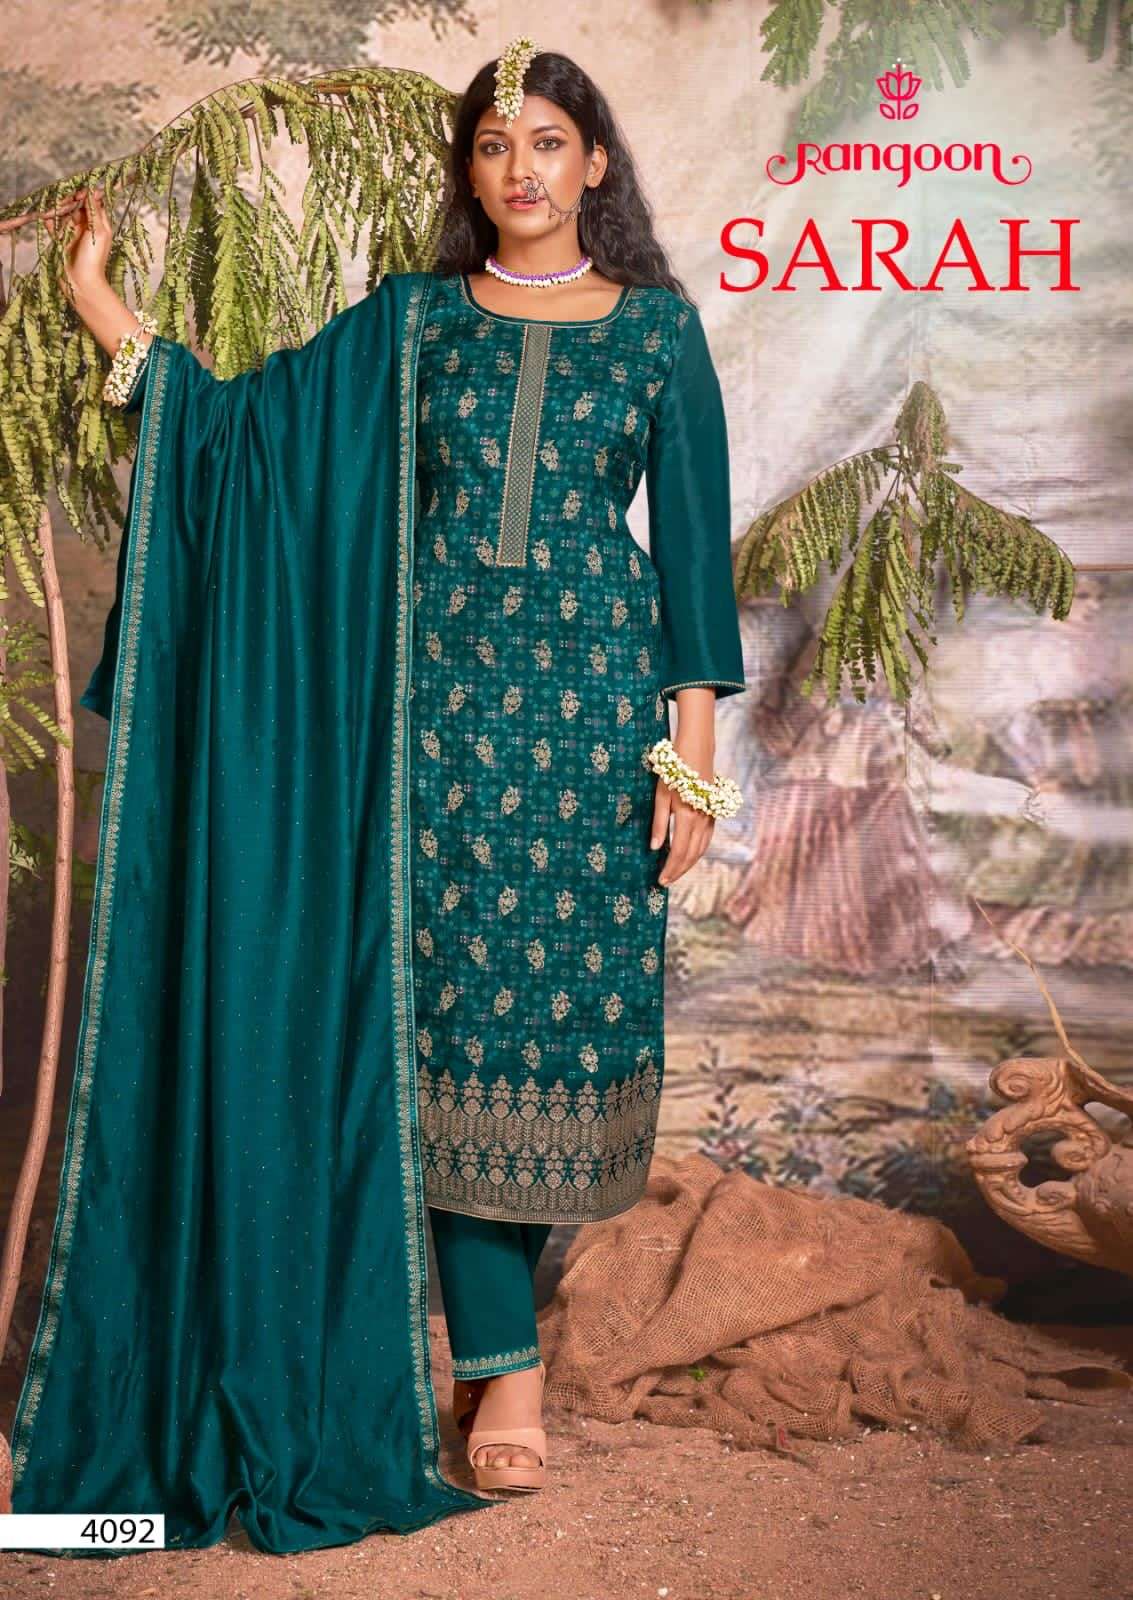 Trending Teal Green Cotton Fancy Kurti for Festival | Thing 1